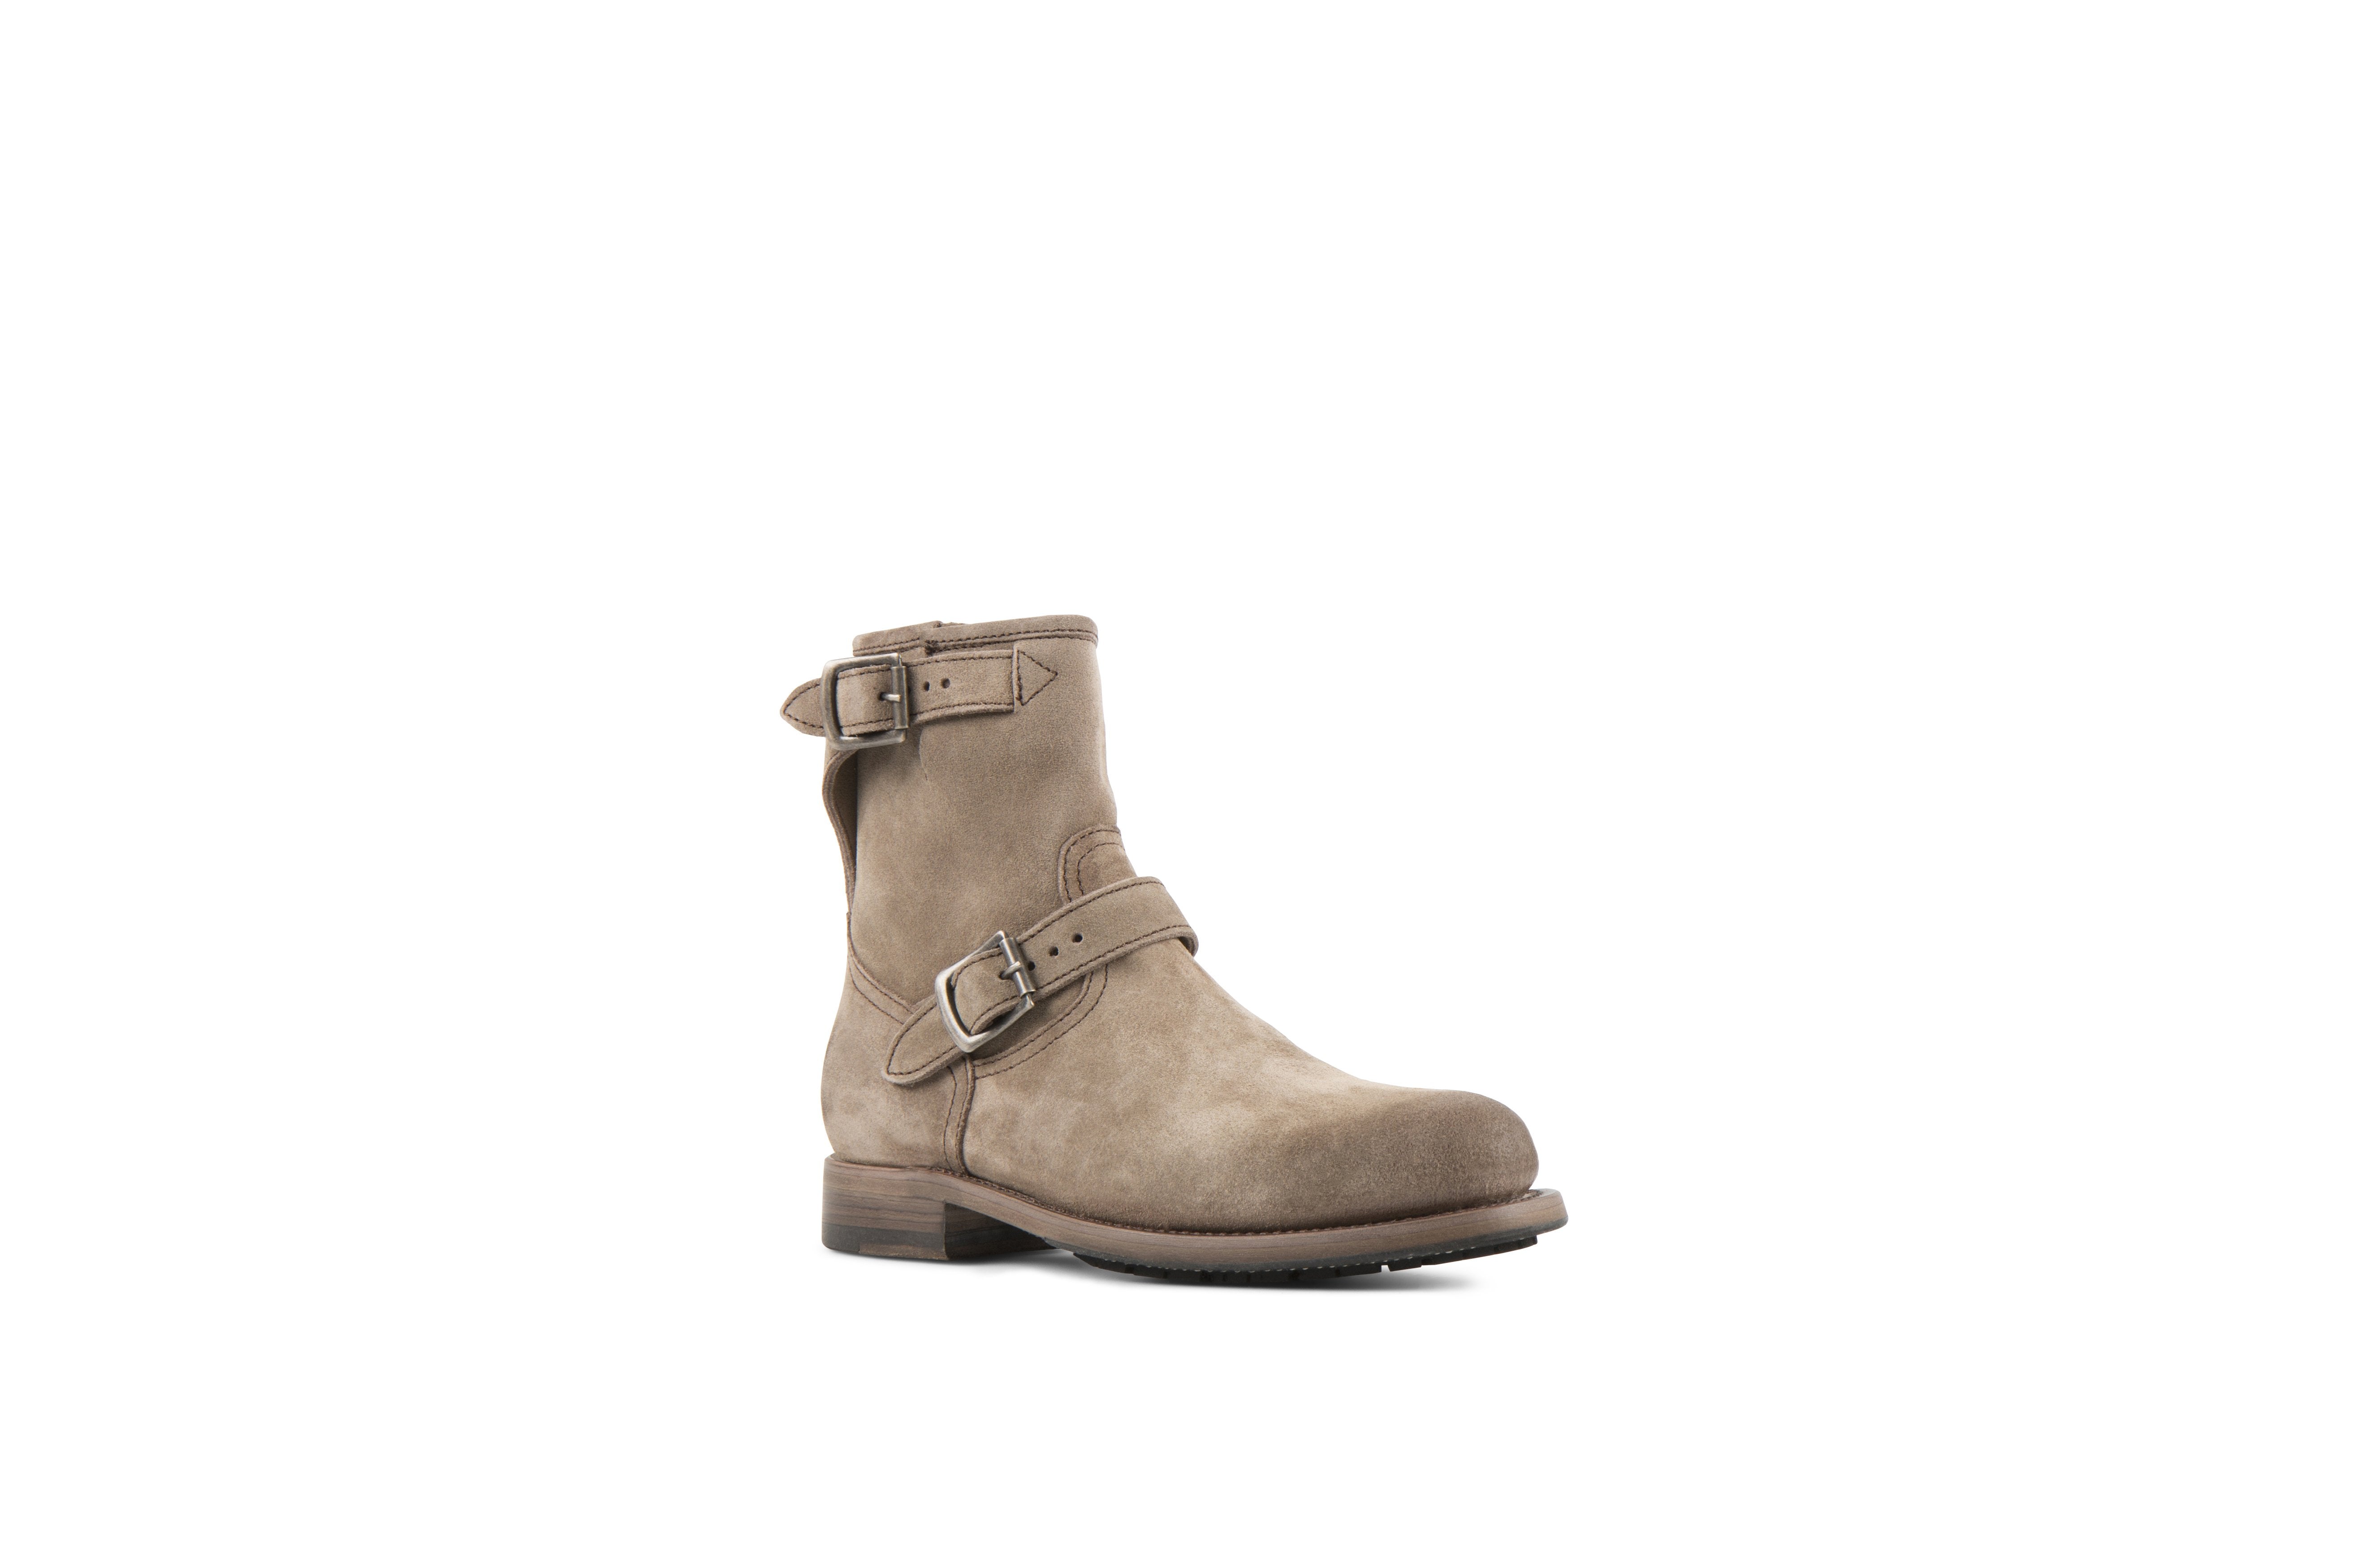 Lowrider Sand Suede Leather Rock Boots